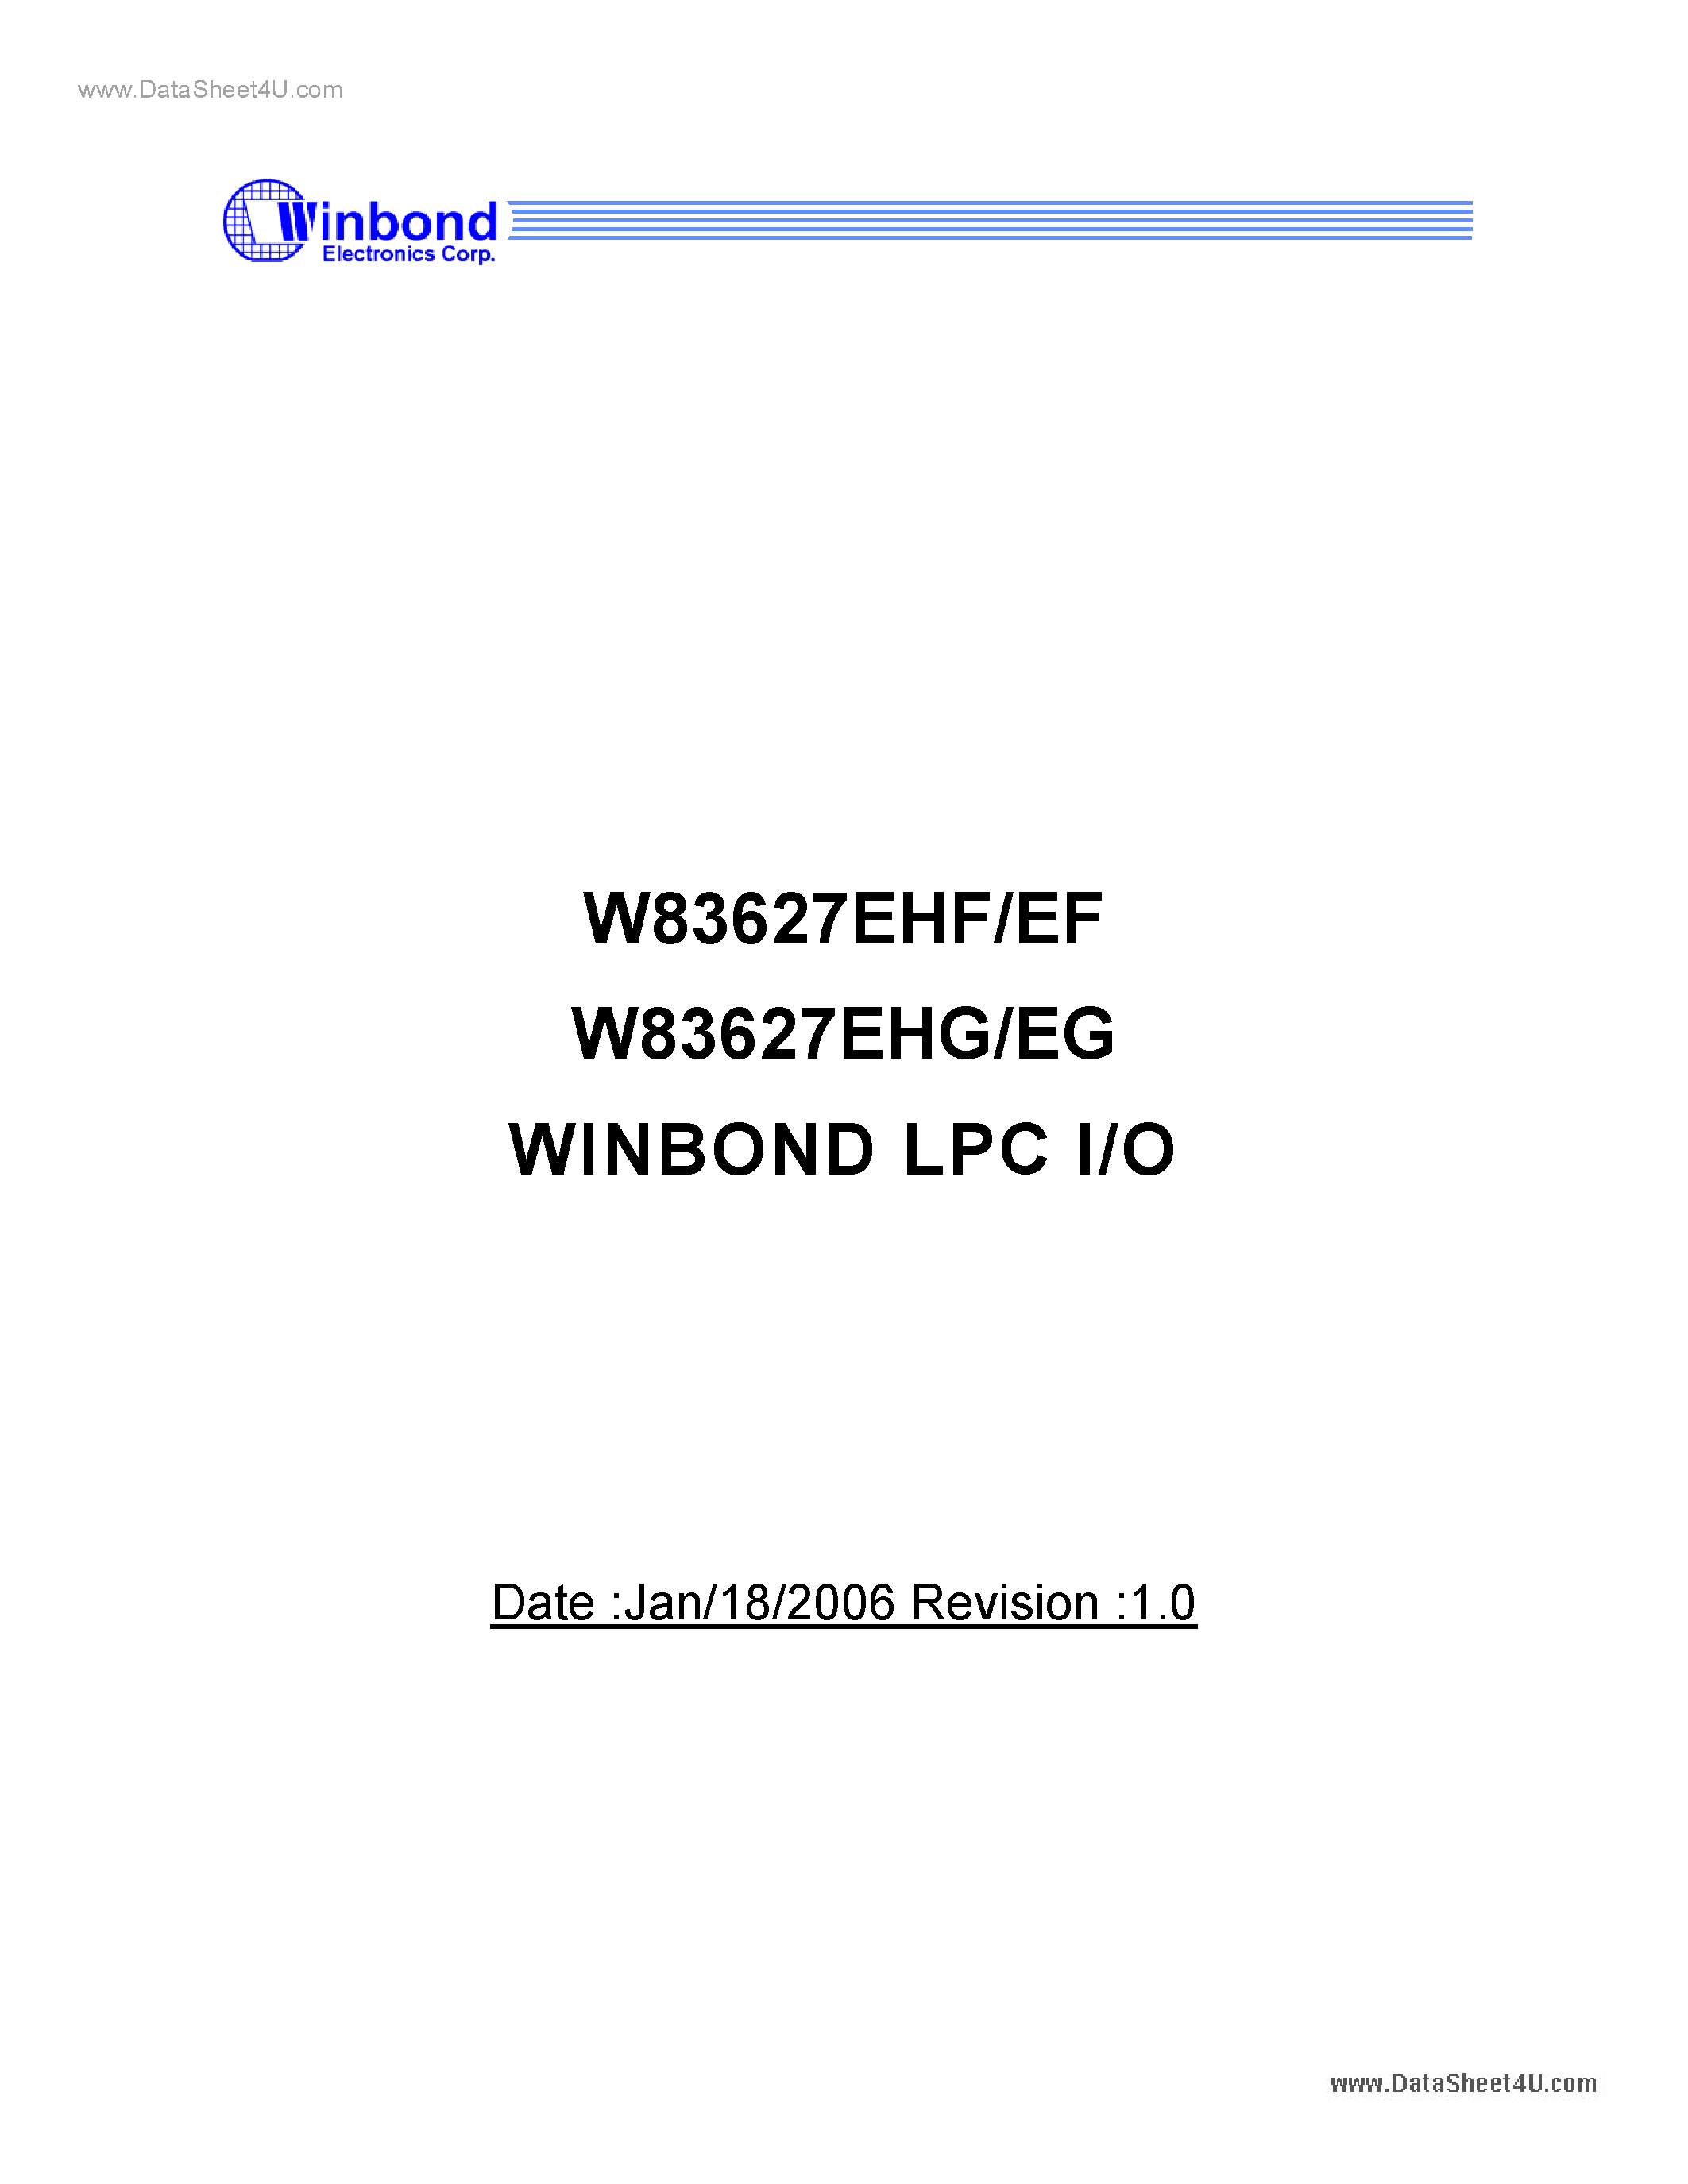 Даташит W83627EEF - evolving product from Winbonds most popular I/O family страница 1